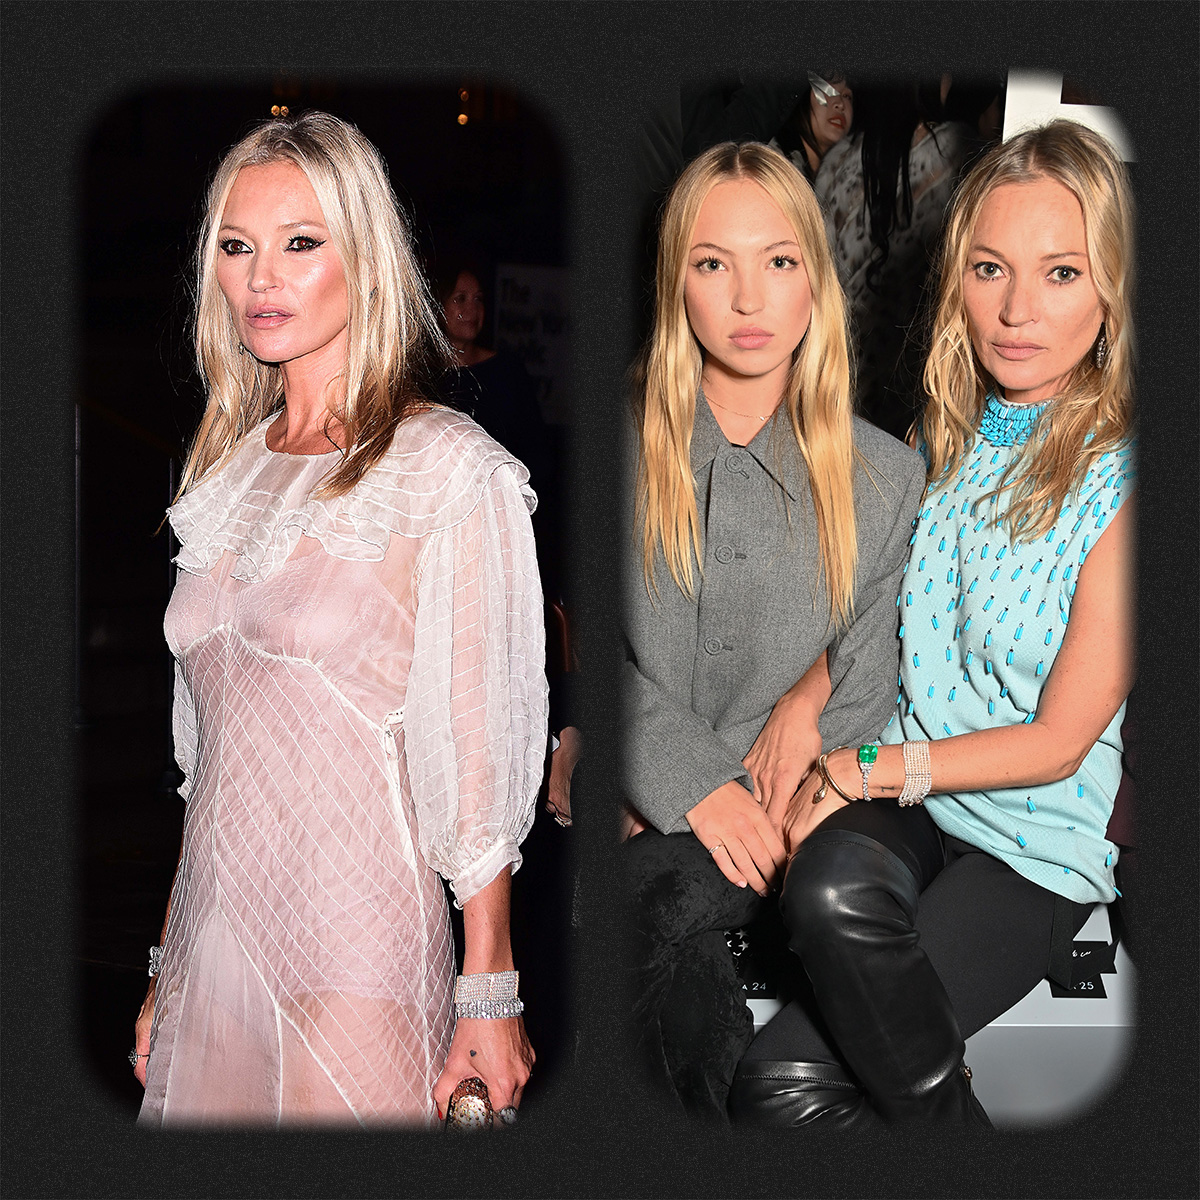 Kate Moss in a sheer dress; Kate Moss with daughter, Lila, at a fashion show